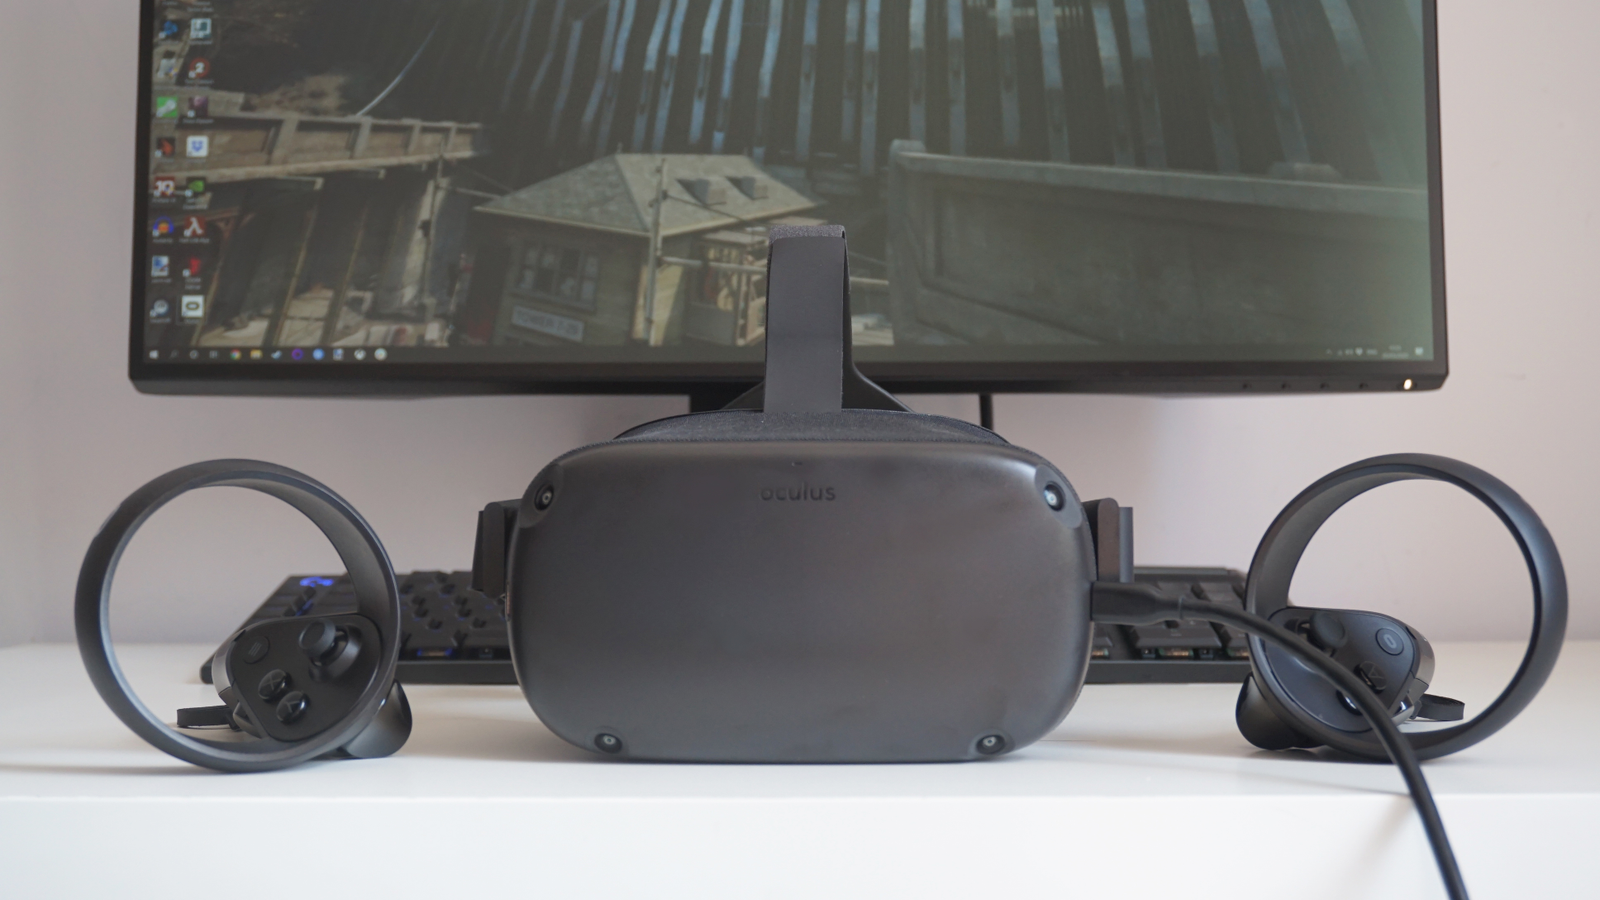 HTC Vive standalone VR headset doesn't need a PC, phone or cables